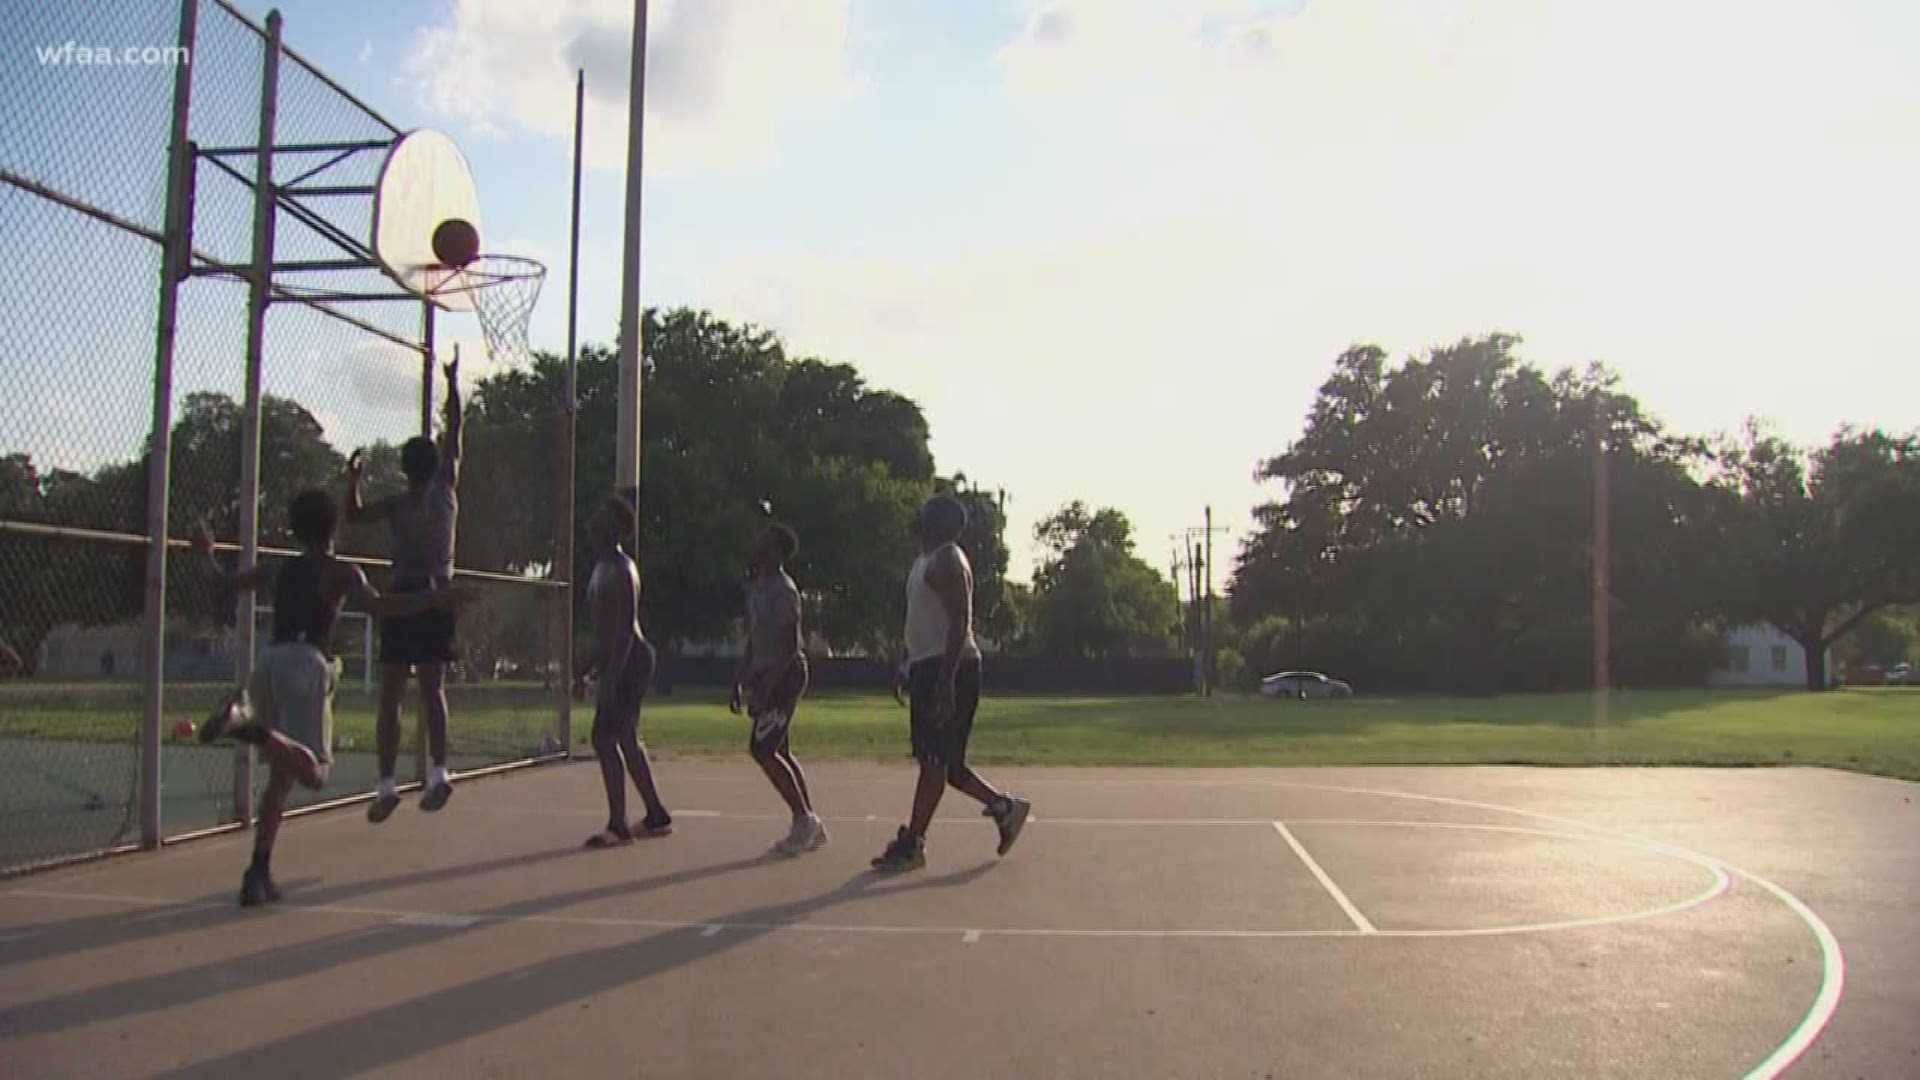 The City of Dallas Parks and Recreation Department is working to give families options and access to resources to help keep teens safe this summer.